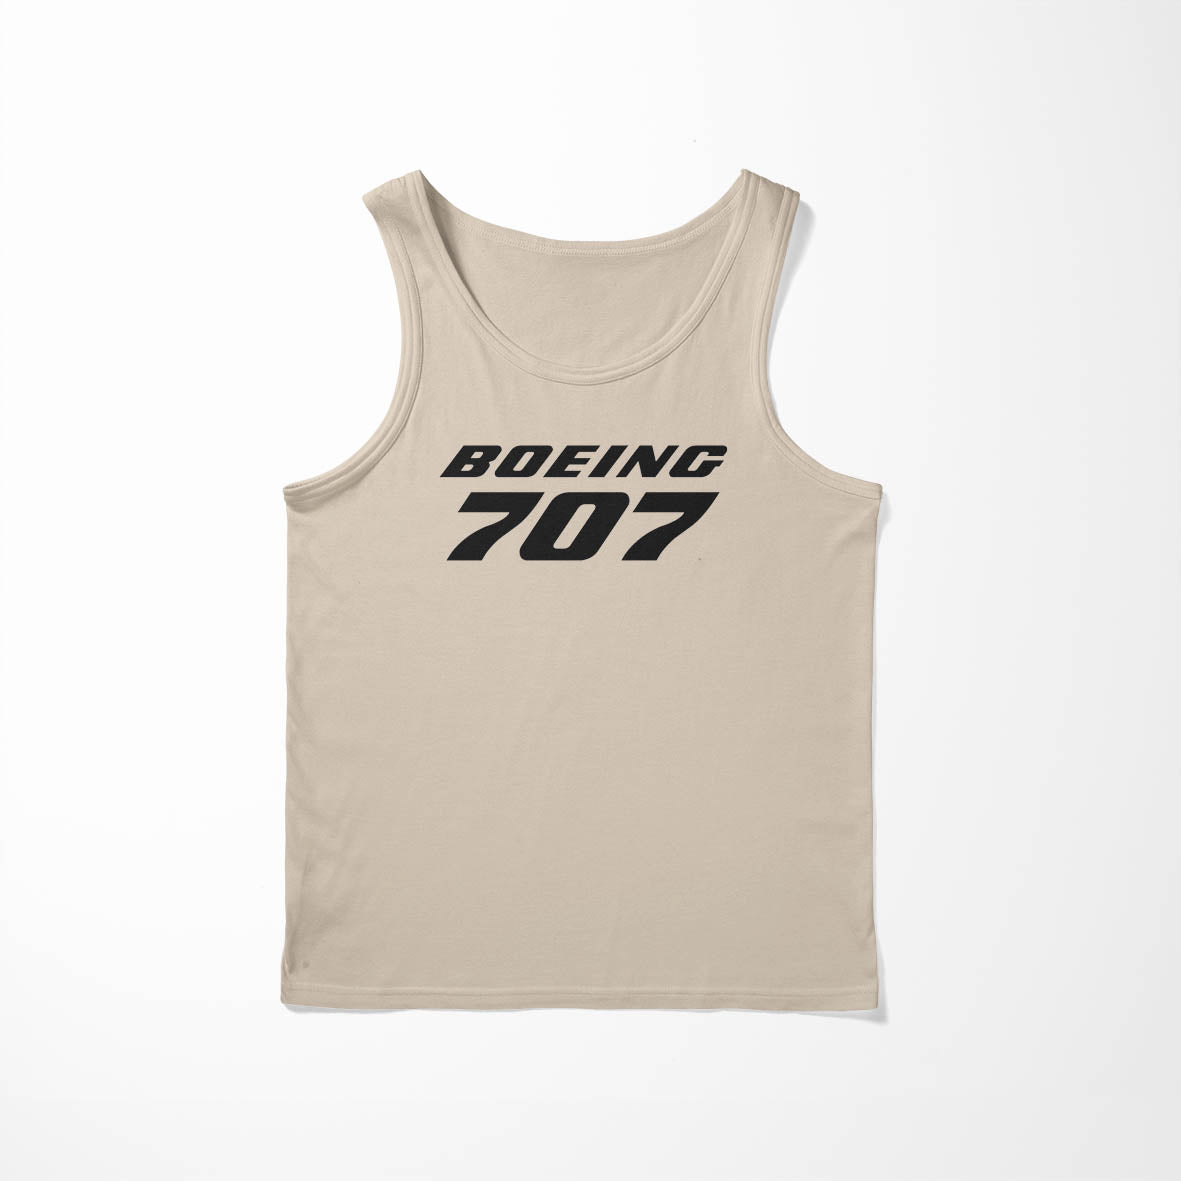 Boeing 707 & Text Designed Tank Tops